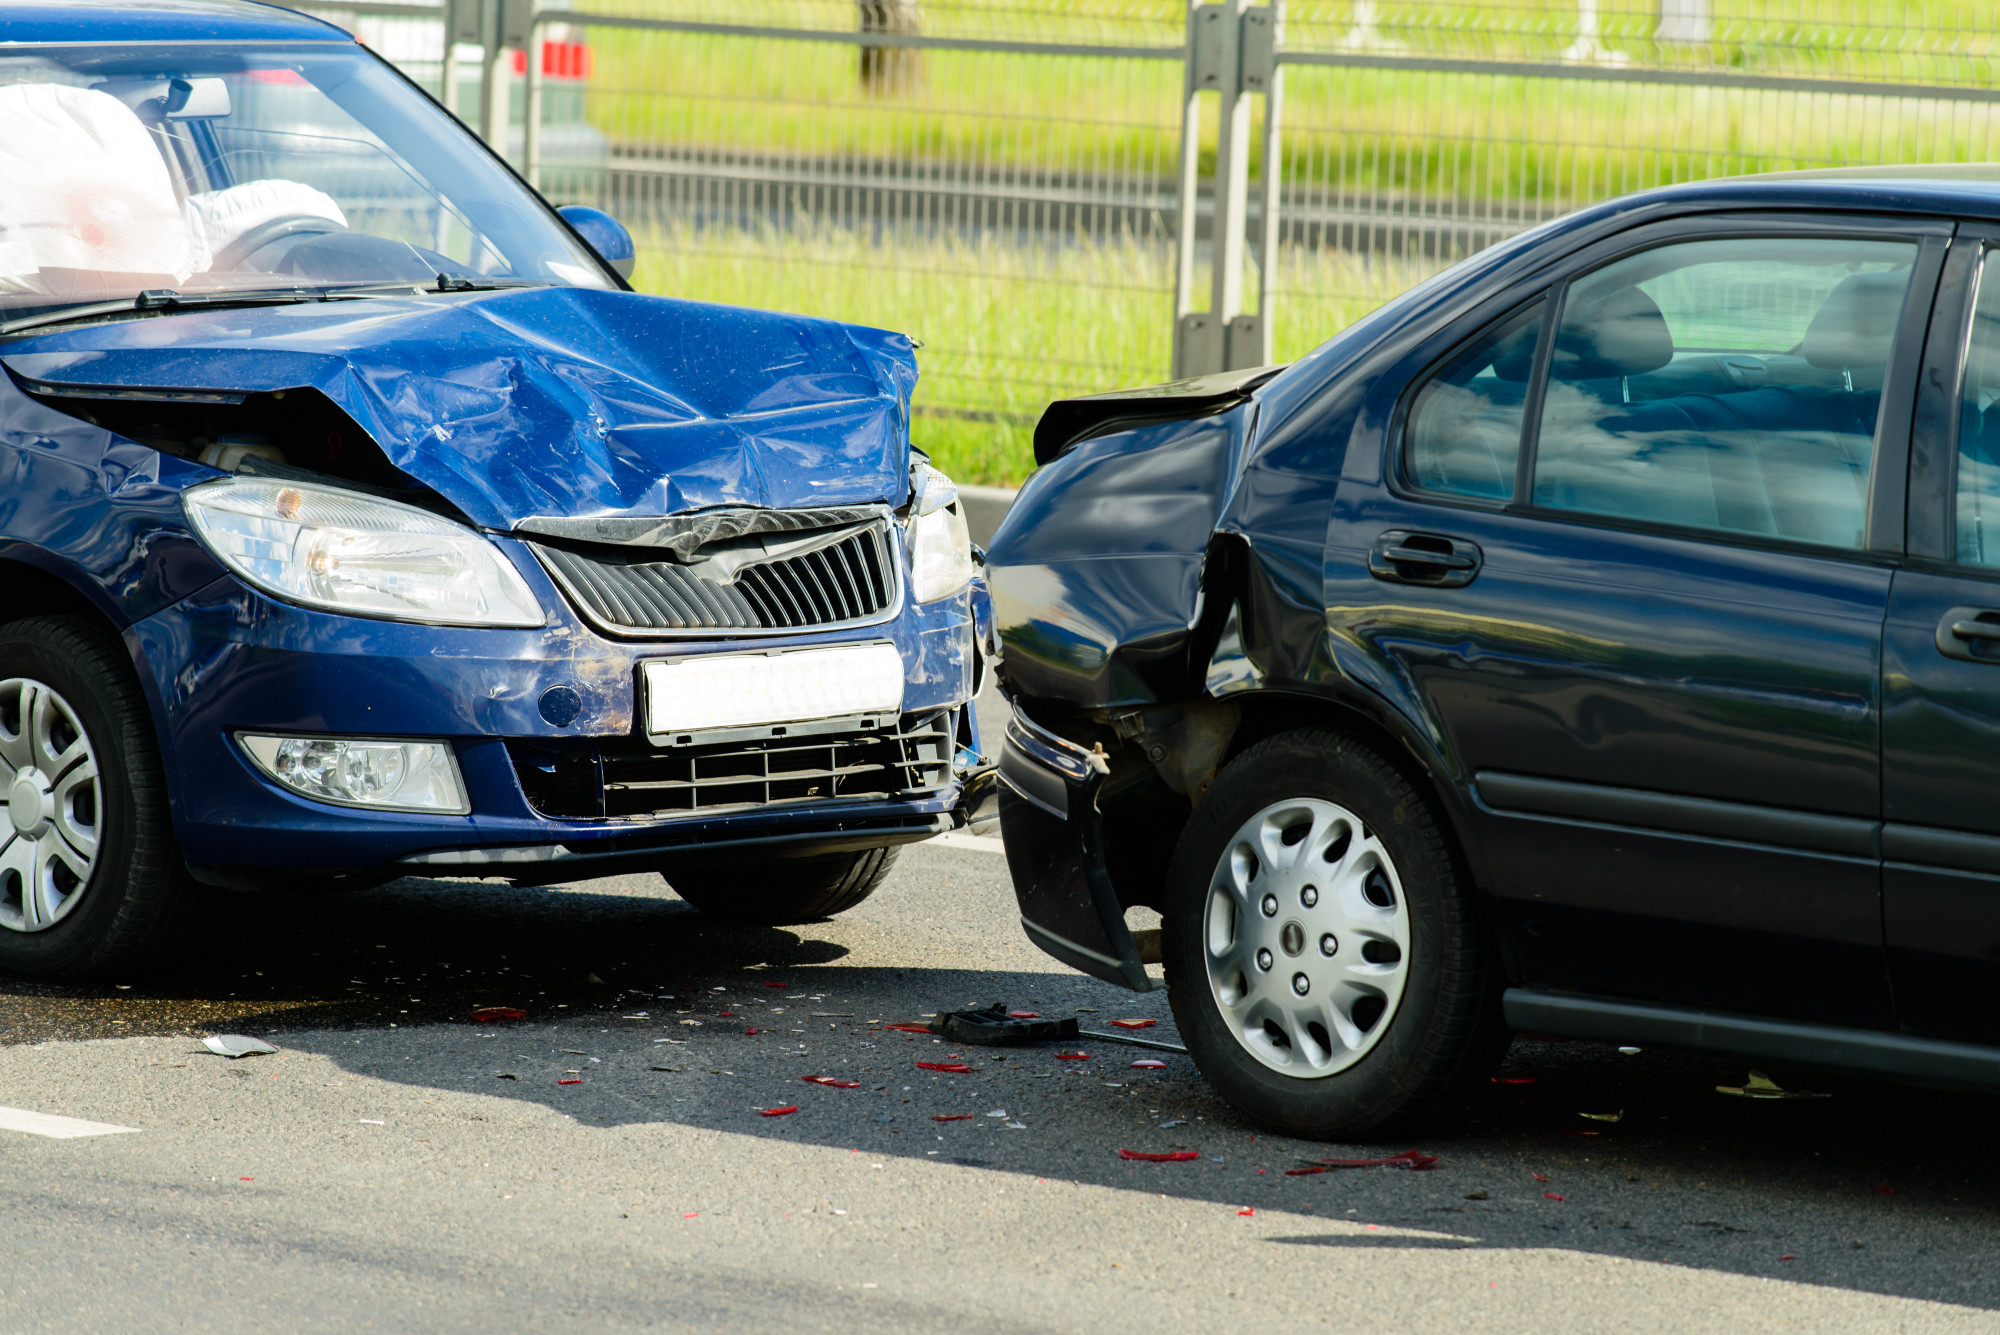 Car accident in LA: Top questions answered